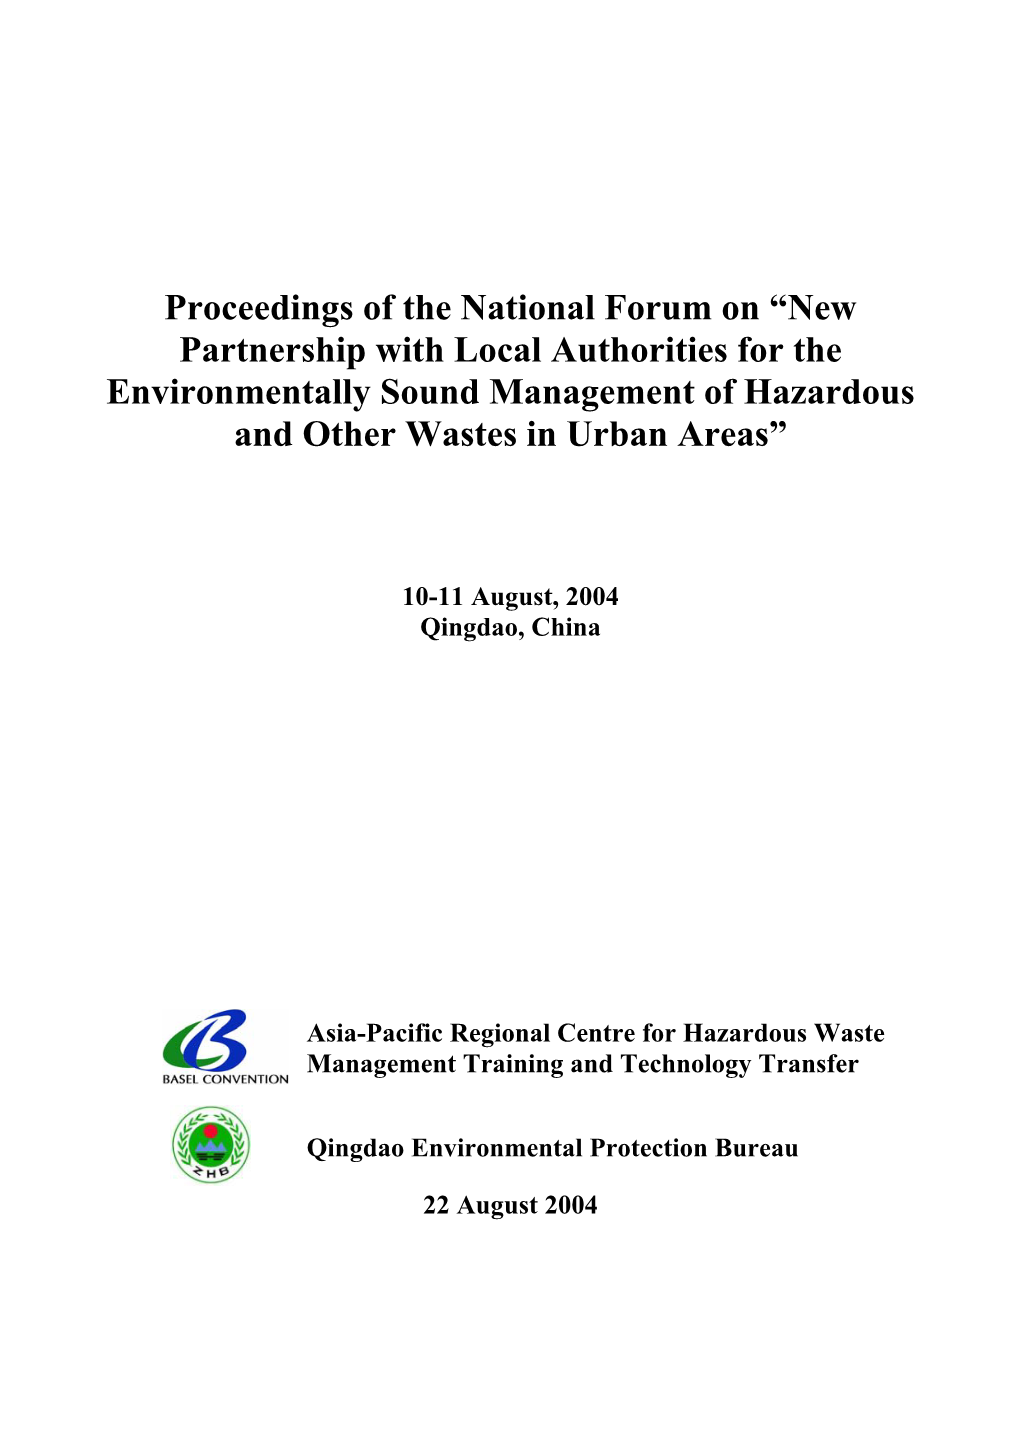 Proceedings of the National Forum on “New Partnership with Local Authorities for the Environmentally Sound Management of Hazardous and Other Wastes in Urban Areas”